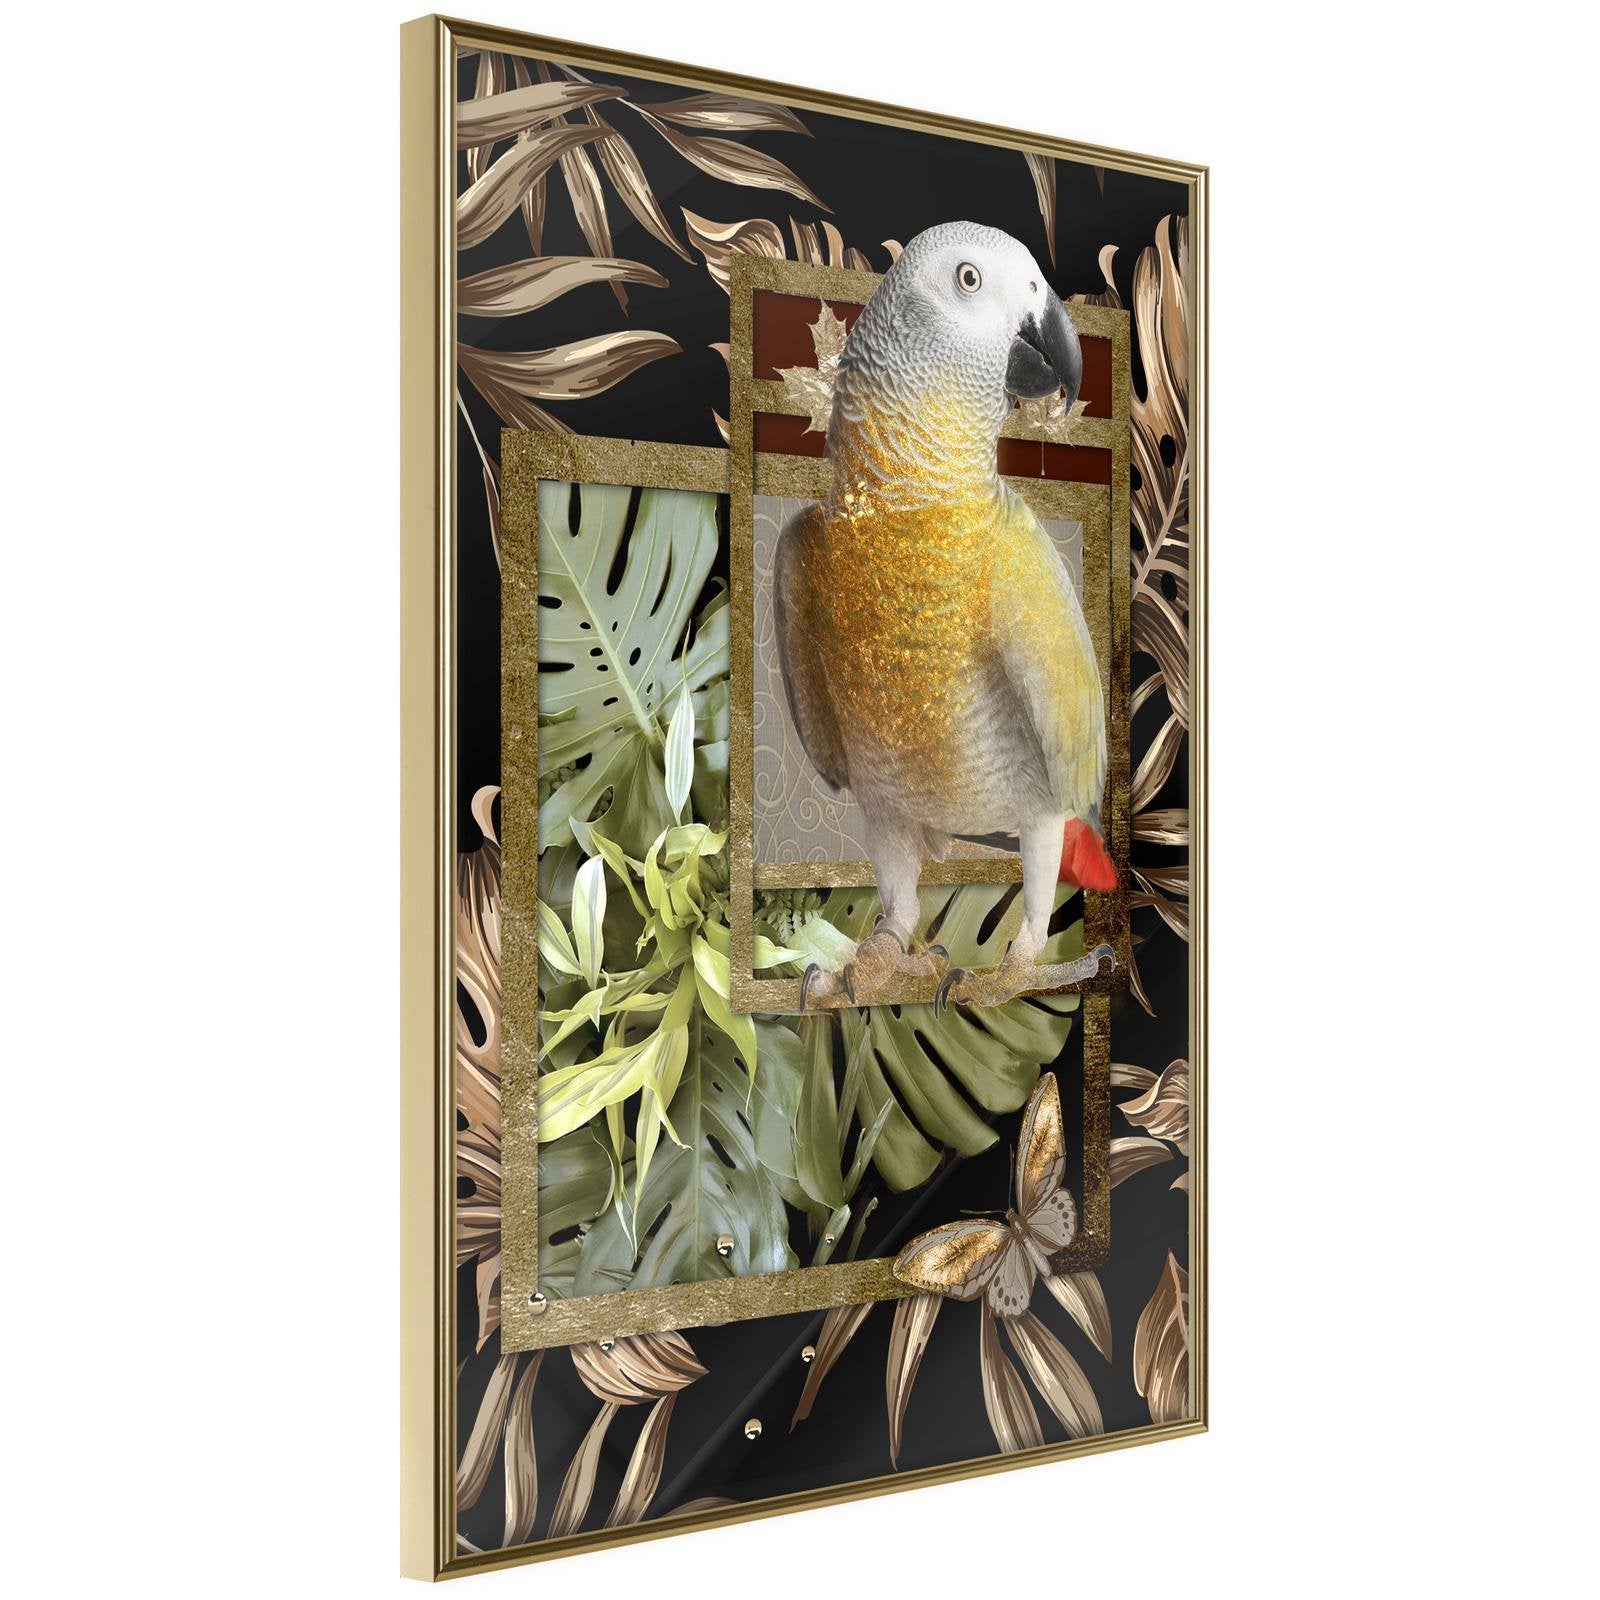 Inramad Poster / Tavla - Composition with Gold Parrot-Poster Inramad-Artgeist-20x30-Guldram-peaceofhome.se